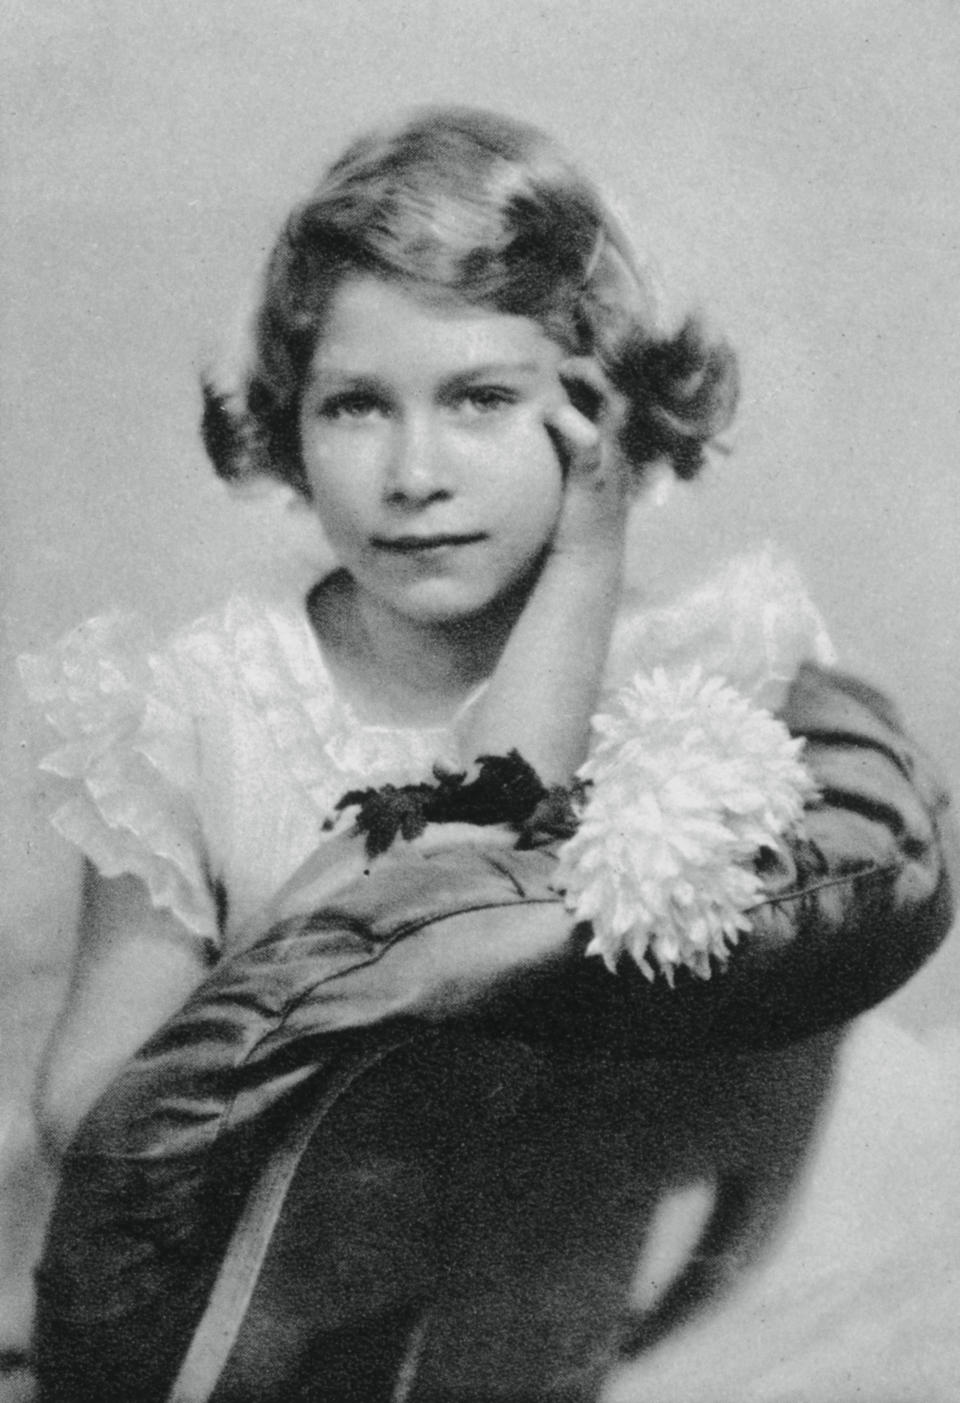 Princess Elizabeth aged nine, 1935, (1937). The future Queen Elizabeth II (1926-). A photograph from the Illustrated London News: Coronation Record Number, (London, 1937). (Photo by The Print Collector/Print Collector/Getty Images)